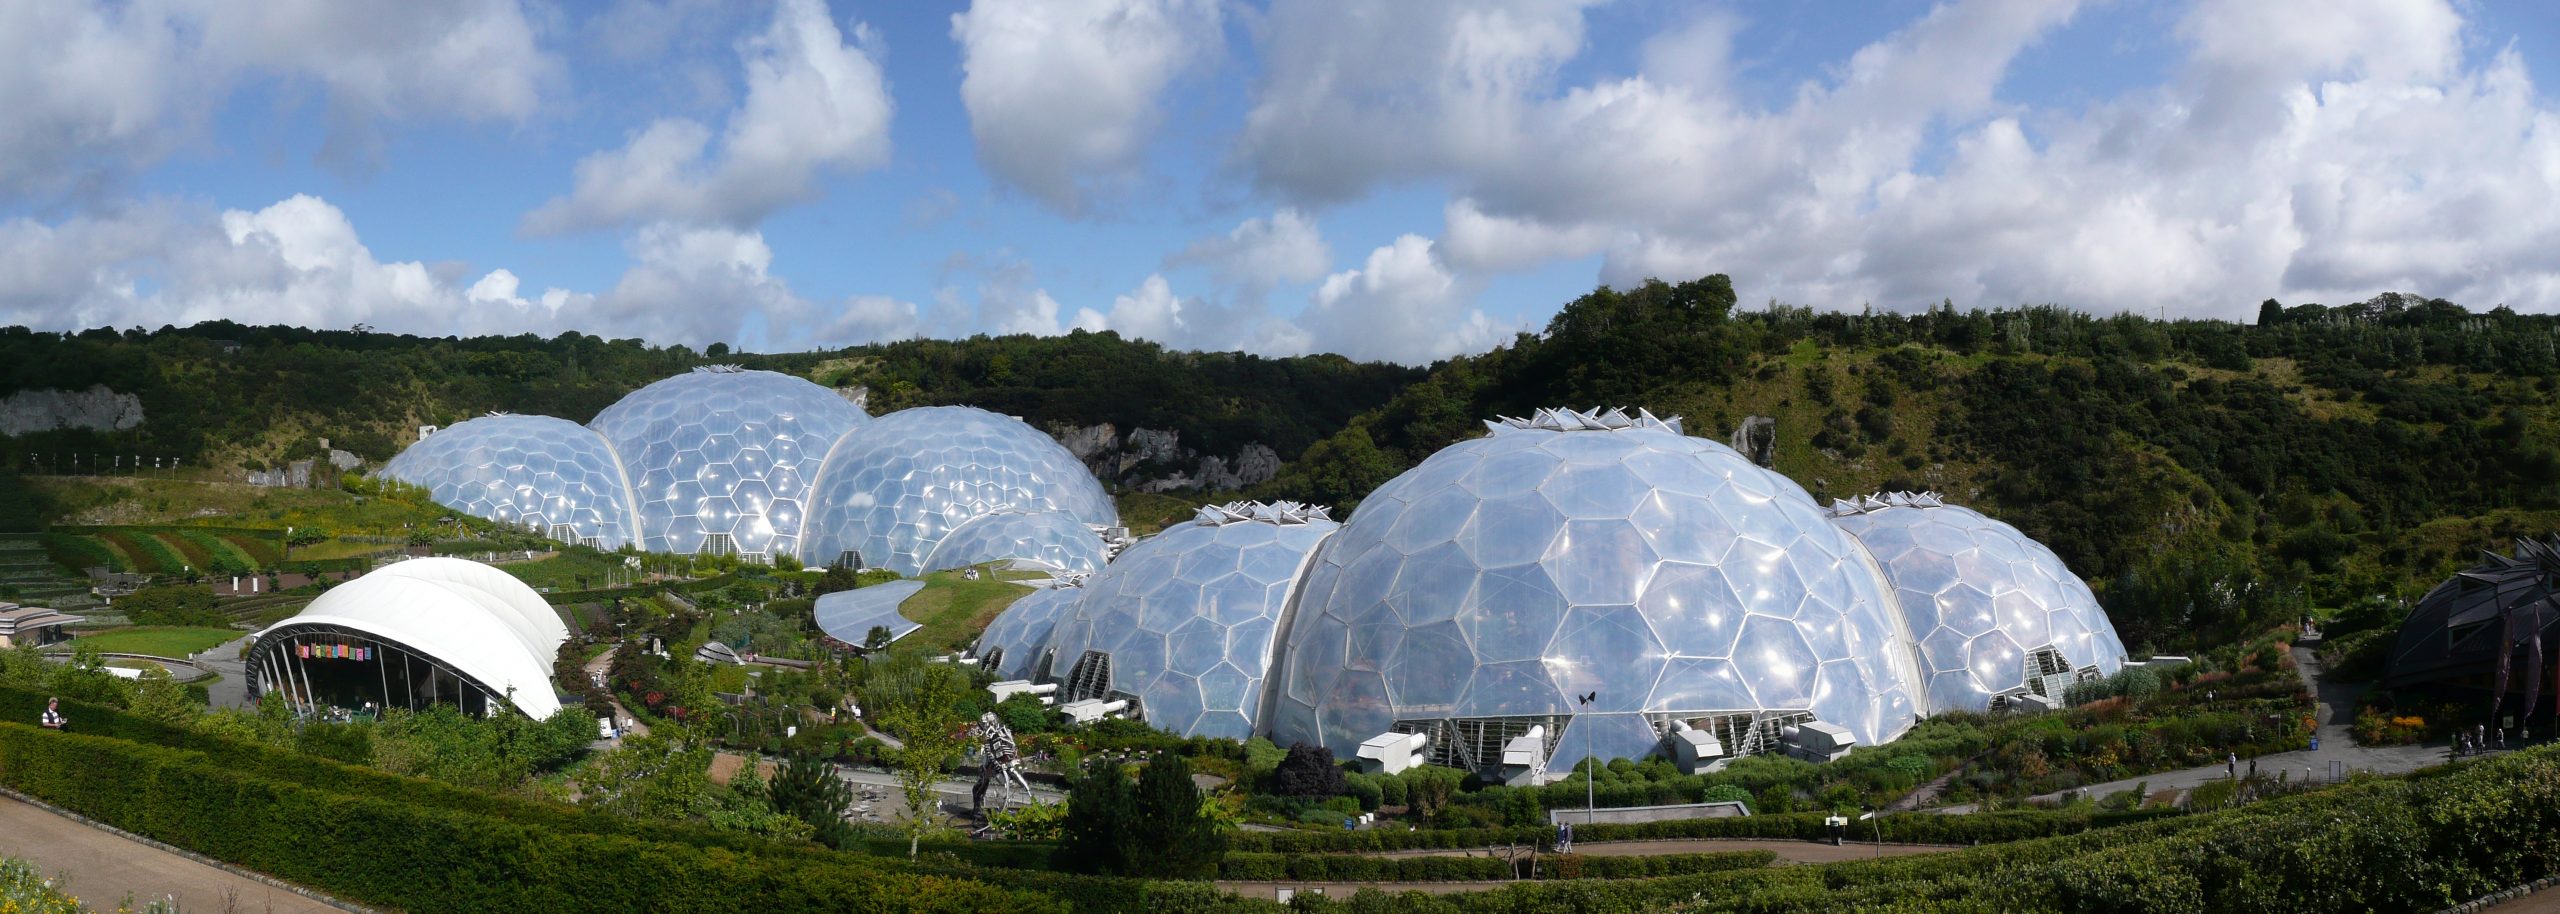 numerous geodomes at the eden project against a background of a cloudy sky